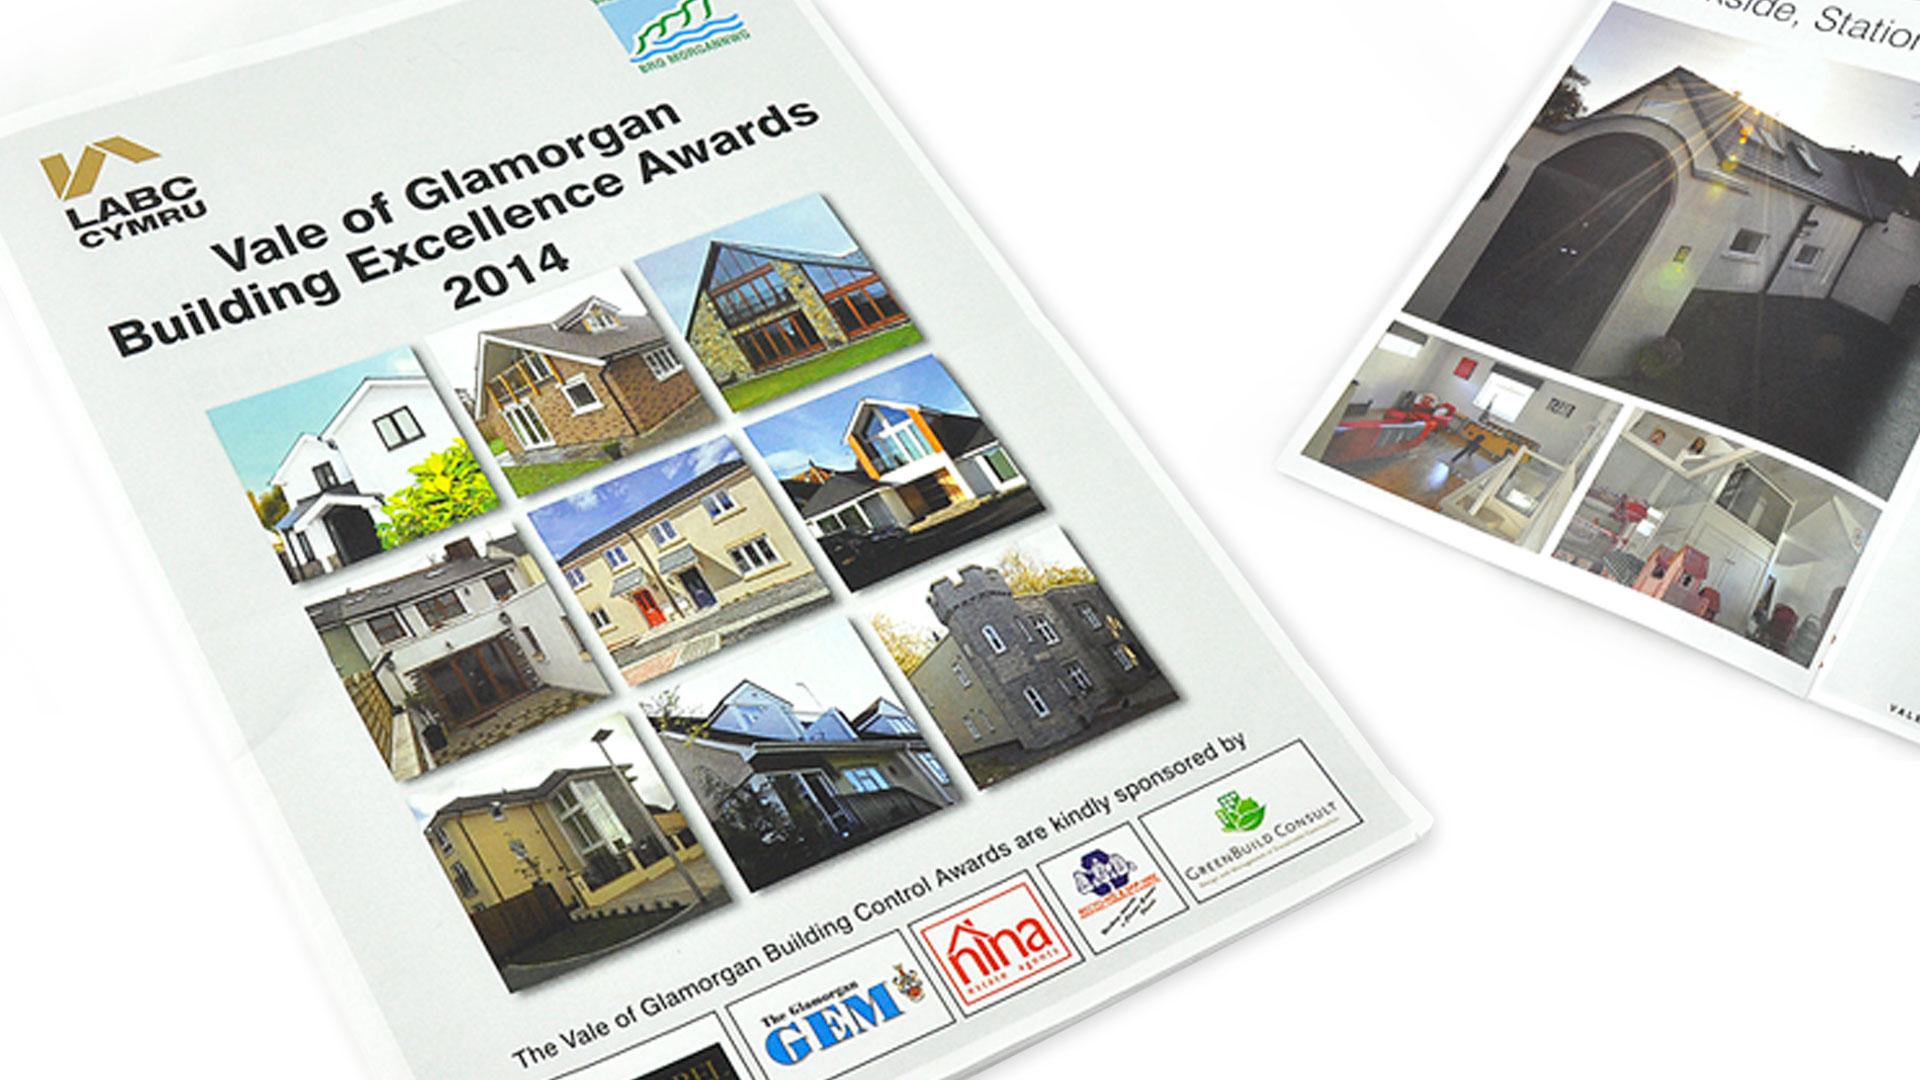 Vale of Glamorgan Council Building Excellence Awards 2014